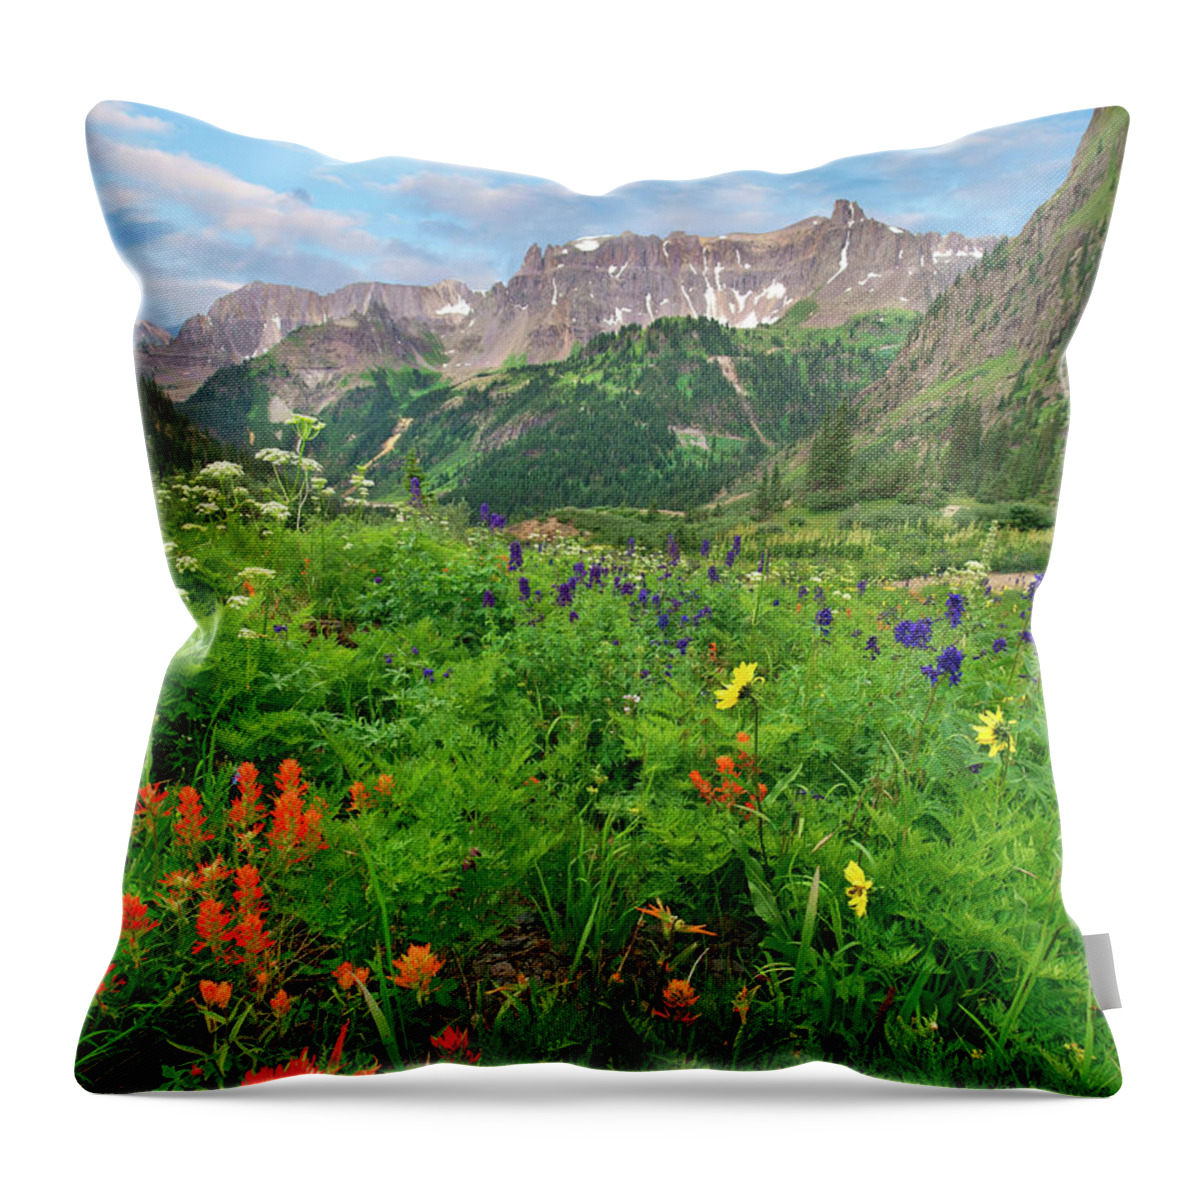 00555618 Throw Pillow featuring the photograph Wildflowers In Yankee Boy Basin, San Juan Mts, Colorado by Tim Fitzharris